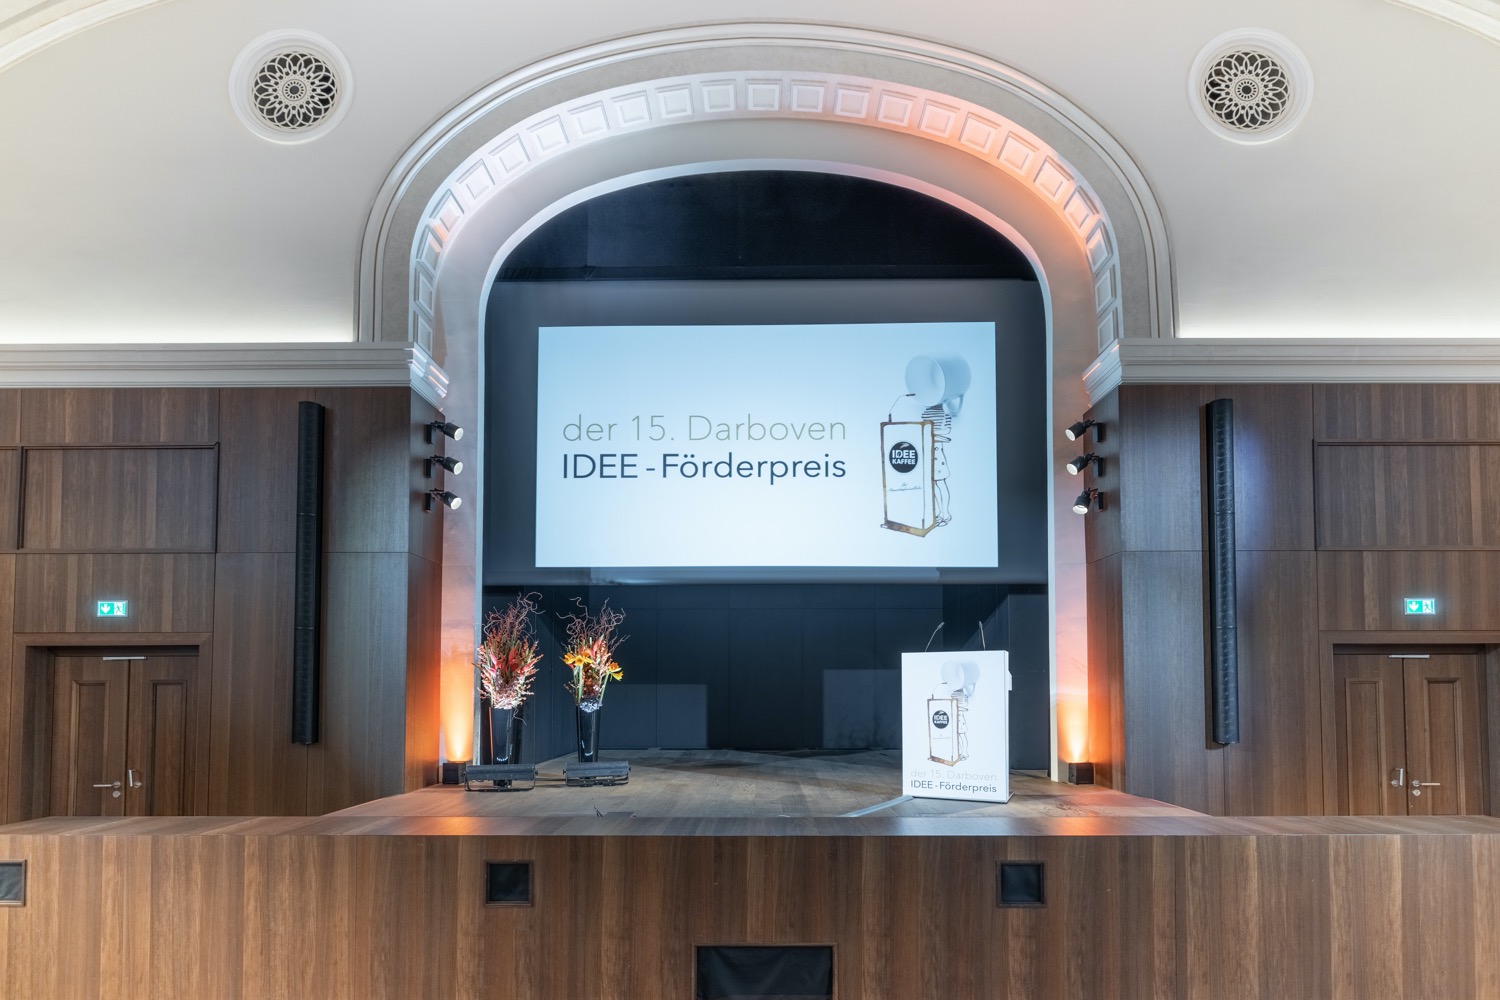 Award ceremony of the 15th Darboven IDEE Sponsorship Prize in Hamburg - frontal view stage